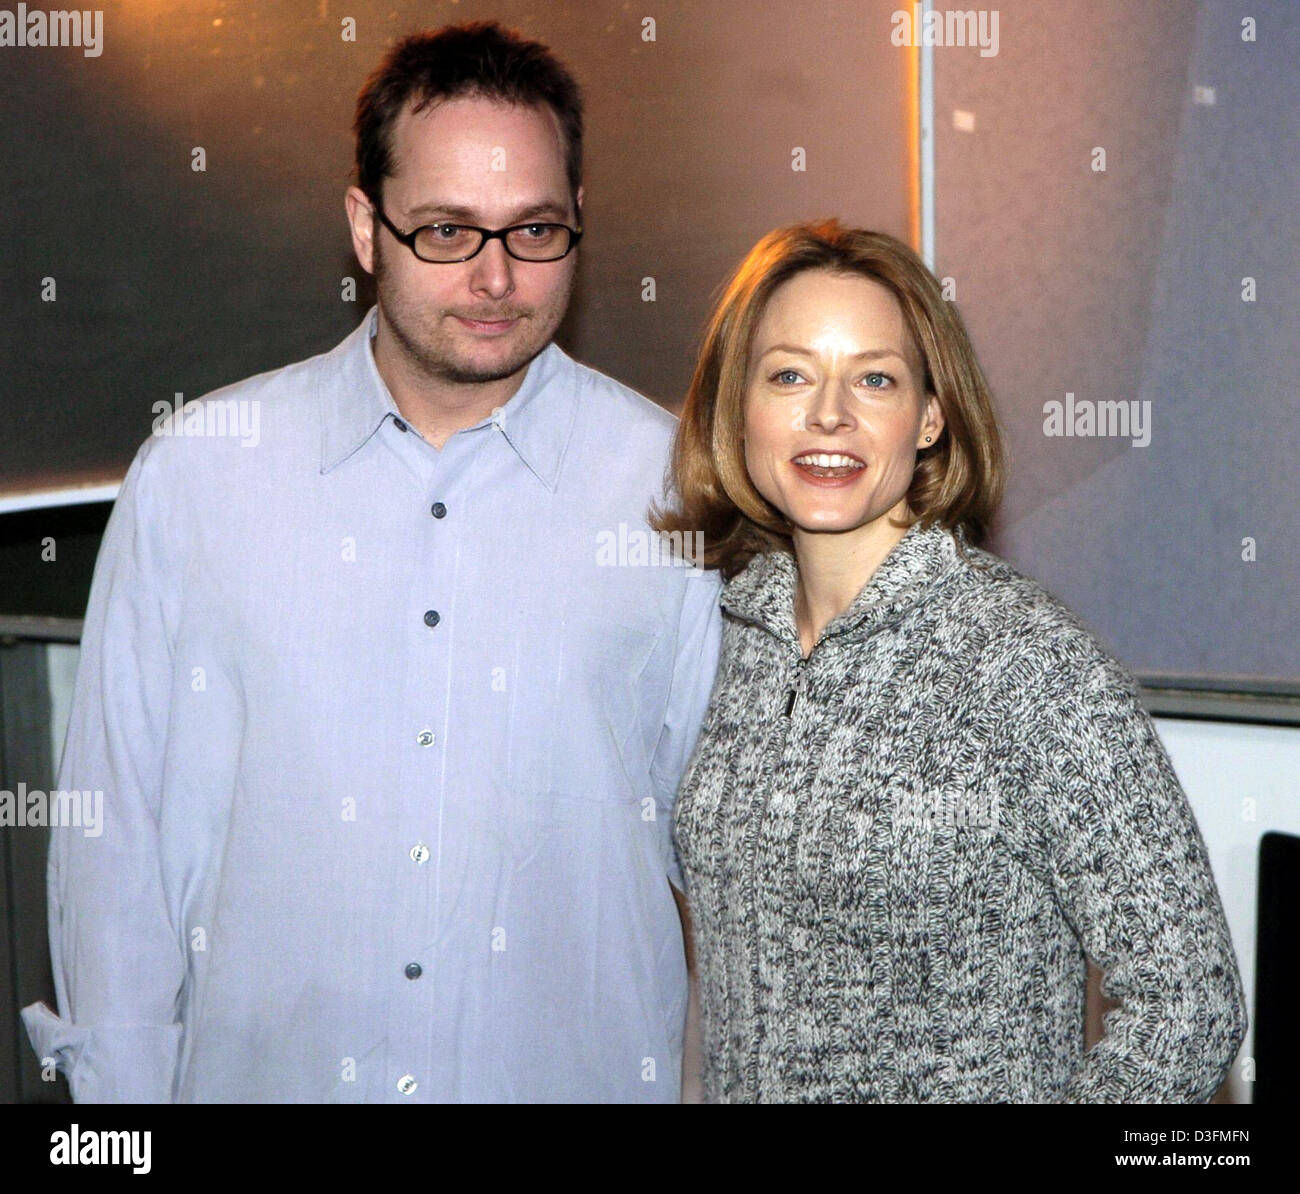 (dpa) - US actress Jodie Foster poses with film director Robert Schwentke during a photocall in Berlin, on Wednesday, 8 December 2004. Their new film 'Flightplan' is currently being shot in Berlin. Stock Photo